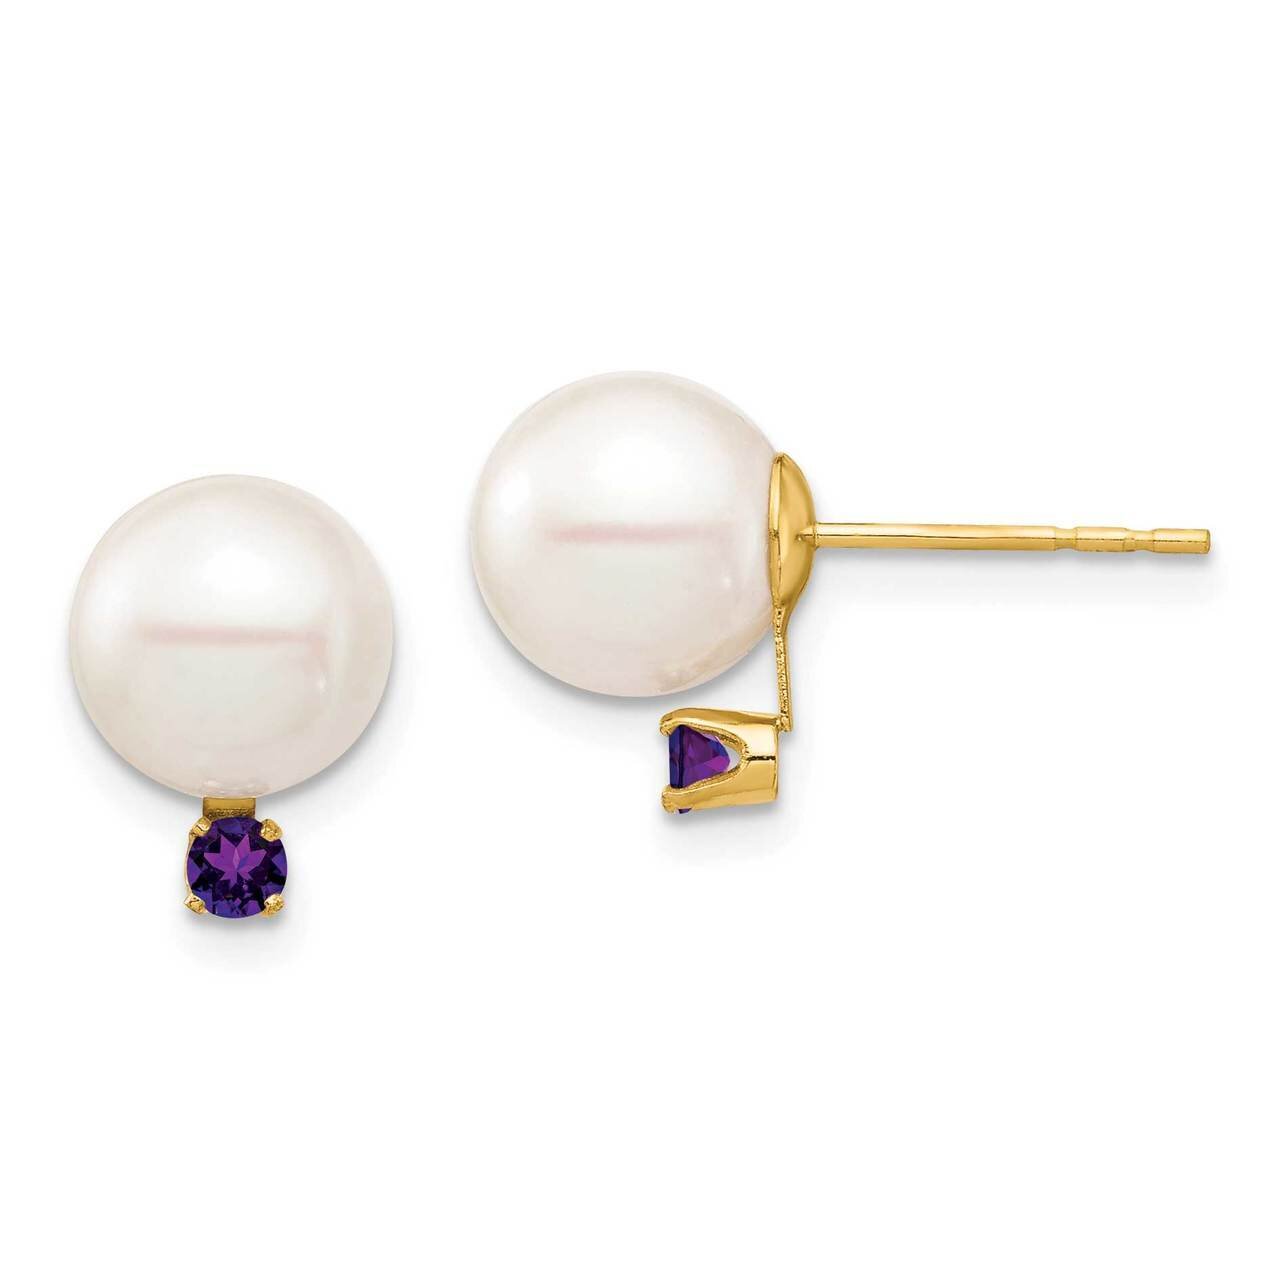 8-8.5mm White Round Freshwater Cultured Pearl Amethyst Post Earrings 14k Gold XF754E_AM